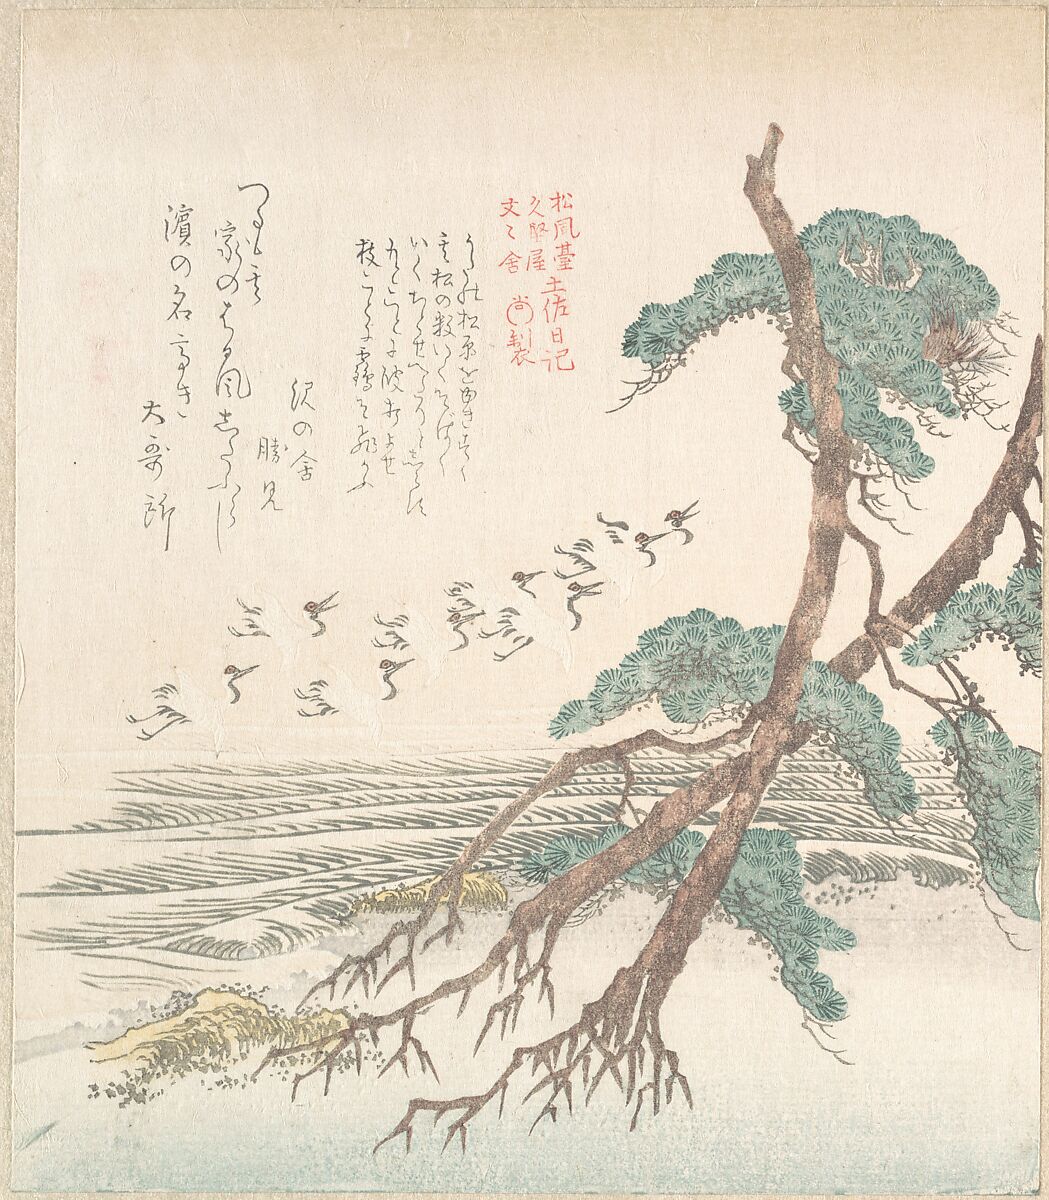 Sea-Side Landscape with Pine Trees and Flying Cranes, Kubo Shunman (Japanese, 1757–1820) (?), Woodblock print (surimono); ink and color on paper, Japan 